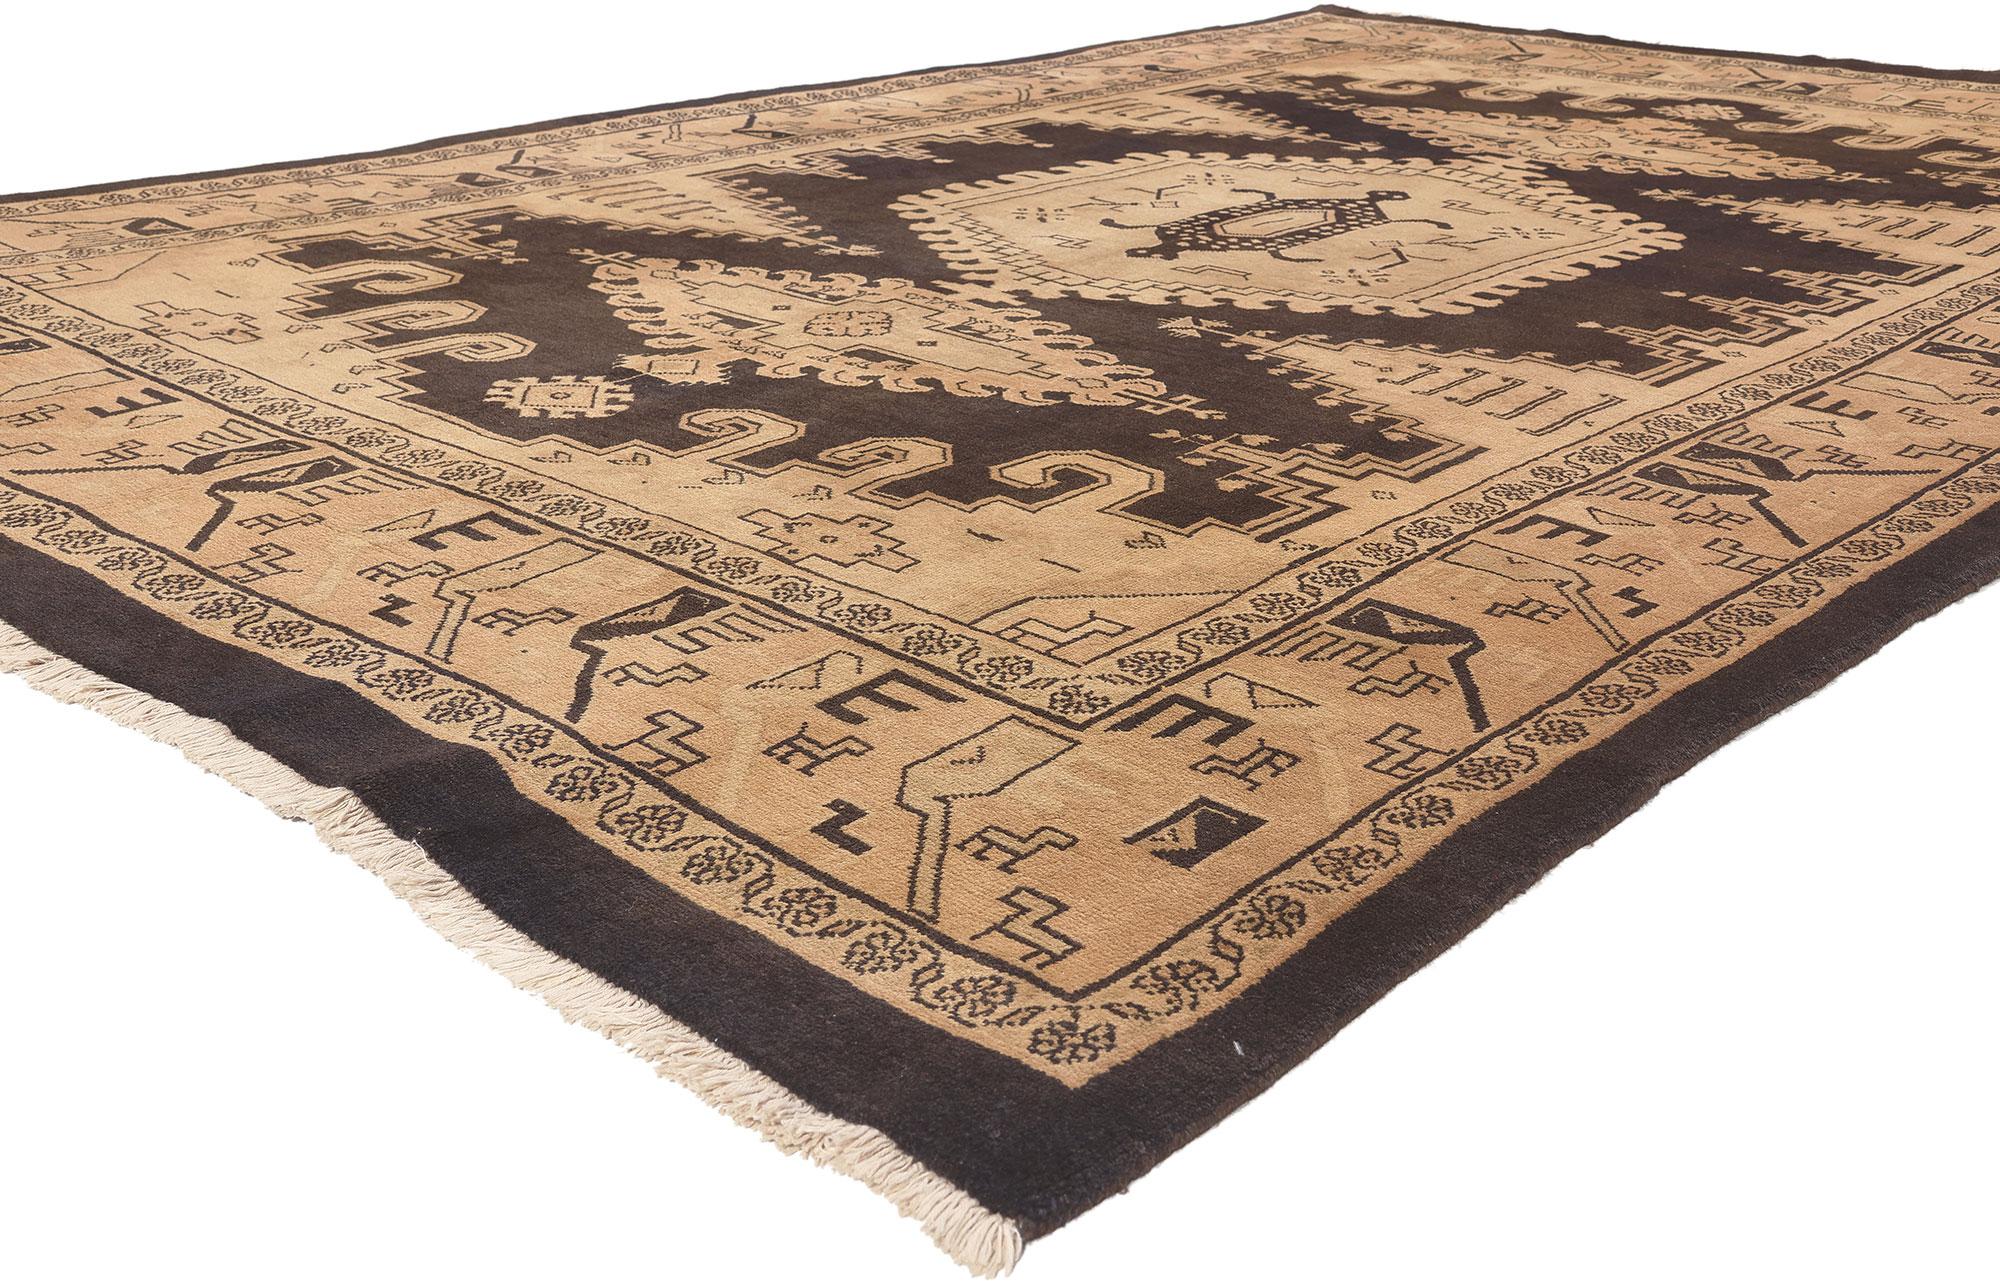 75843 Vintage Persian Mahal Rug, 07'01 X 11'02. 
Luxury lodge meets global style in this hand knotted wool vintage Persian Mahal rug. The intrinsic tribal design and monochromic colorway woven into this piece work together creating a  modern